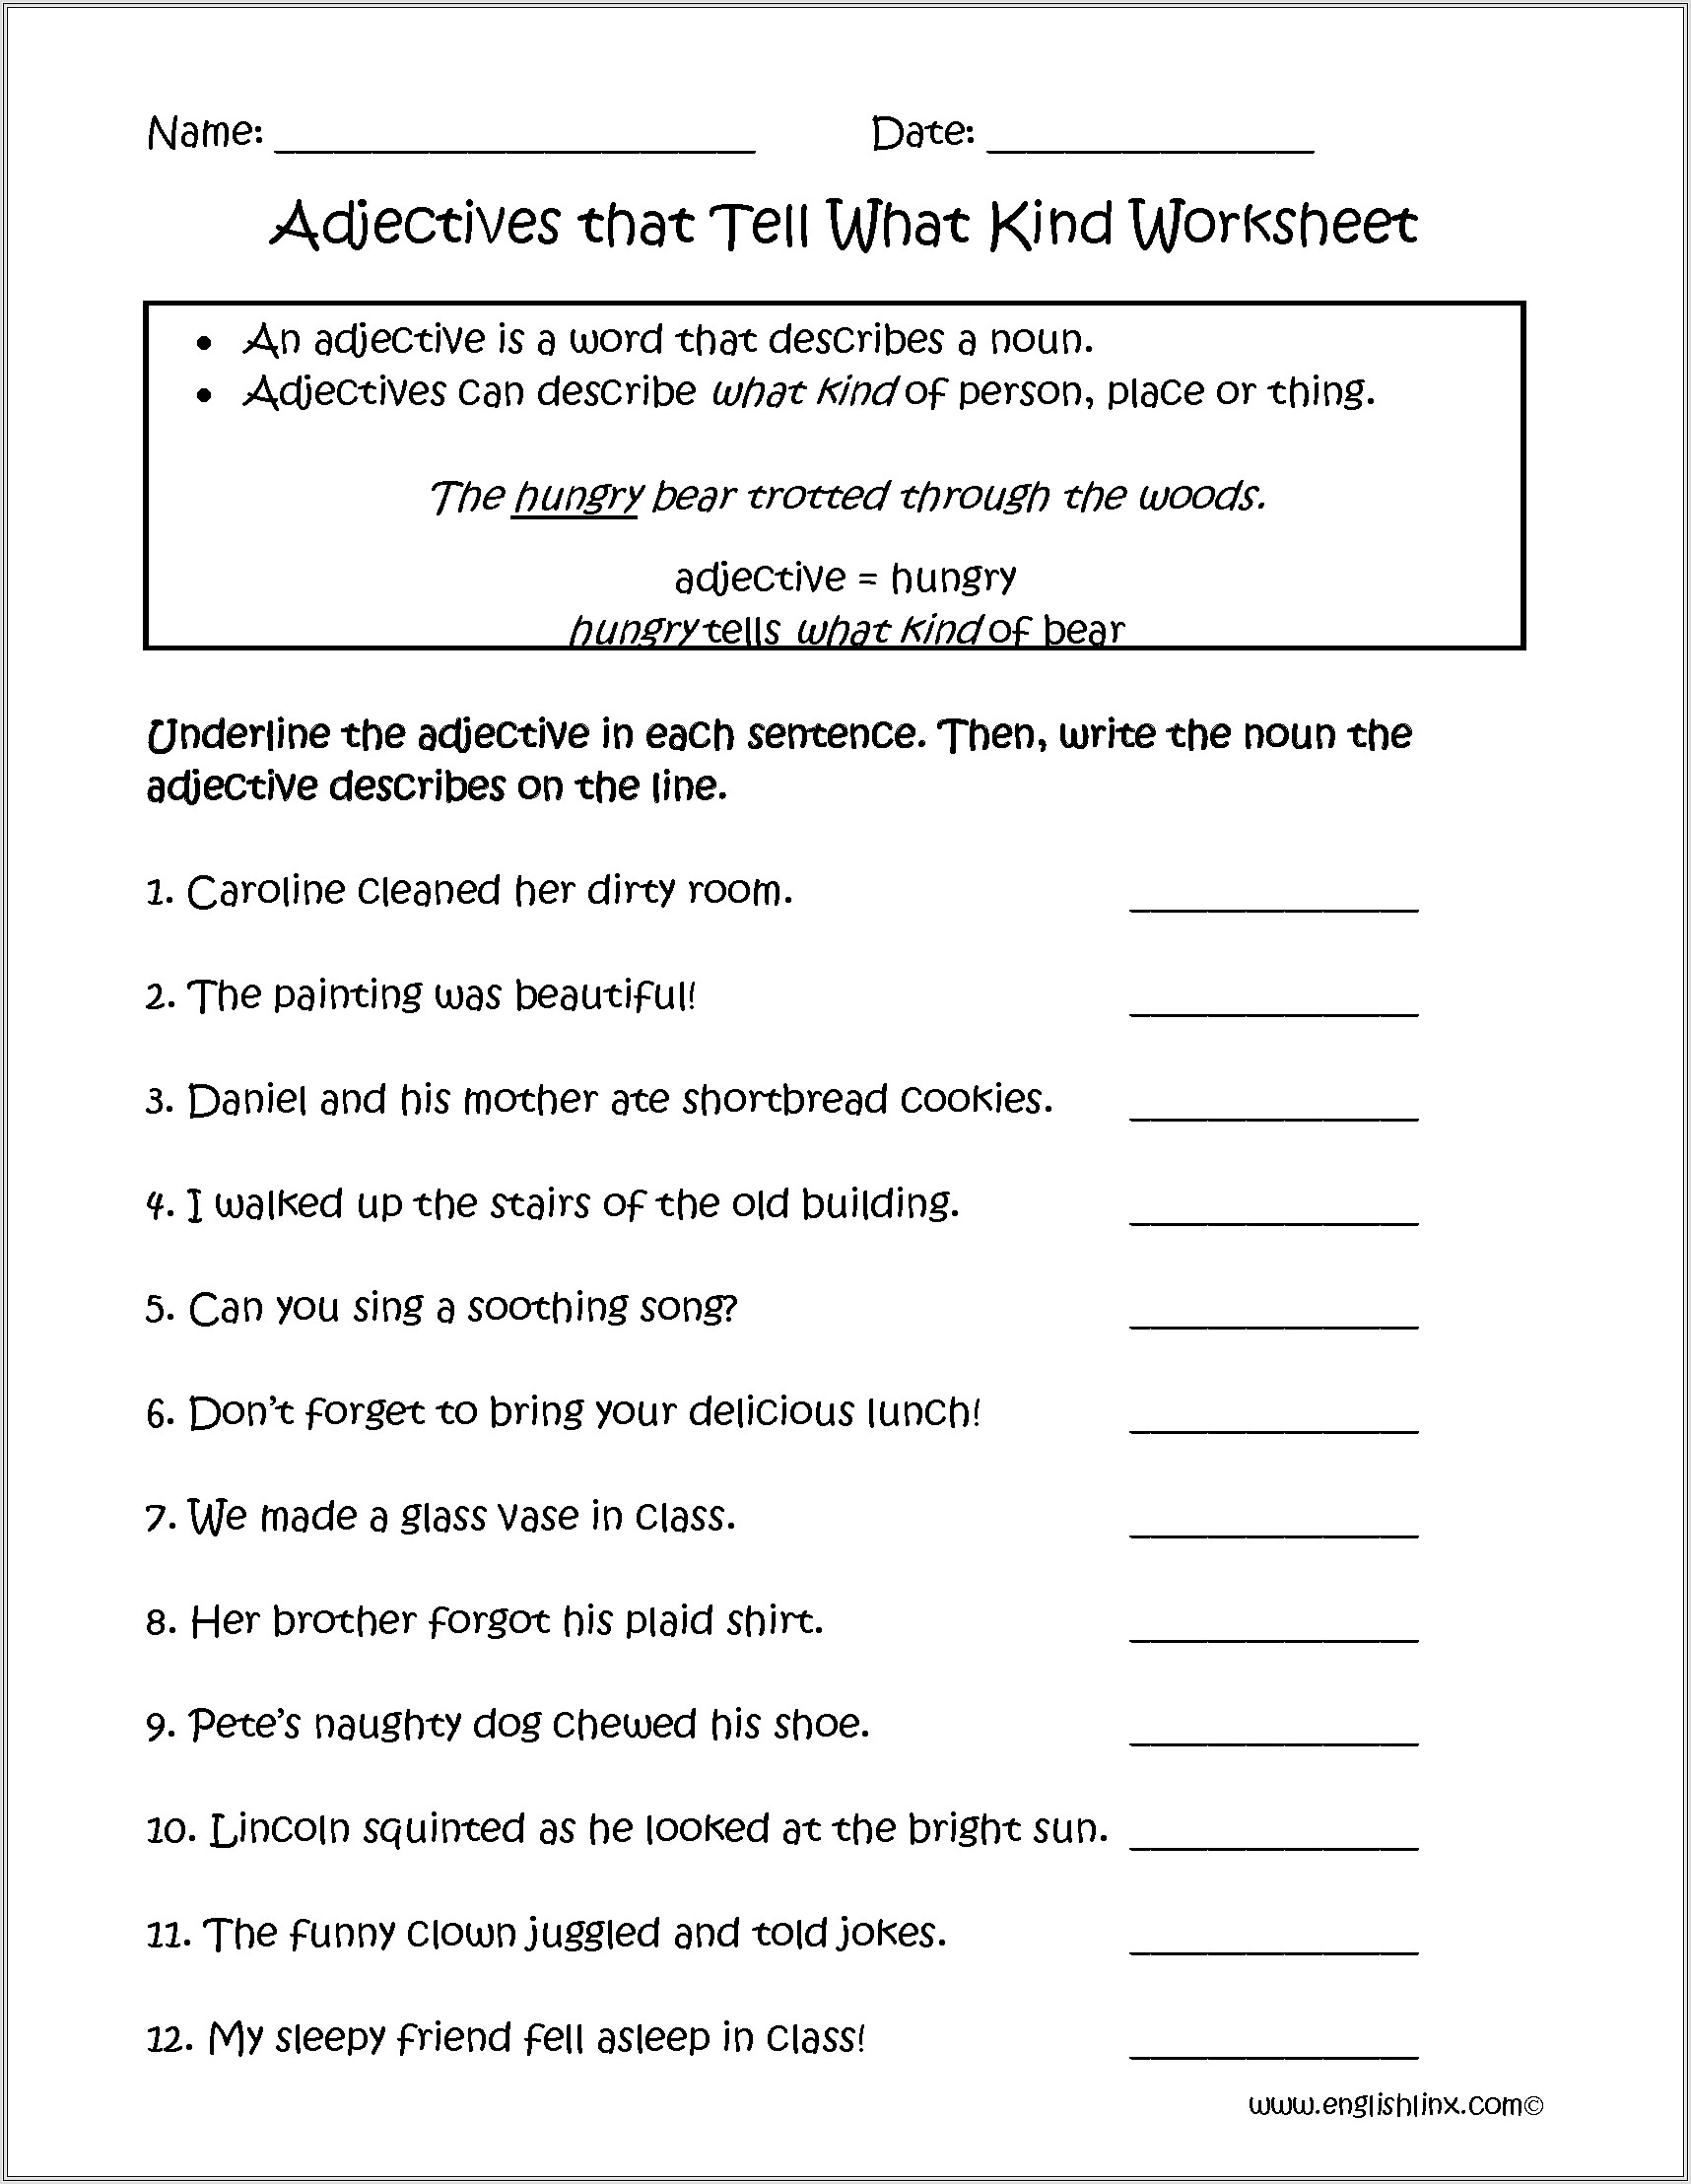 English Worksheet On Adjectives For Class 4